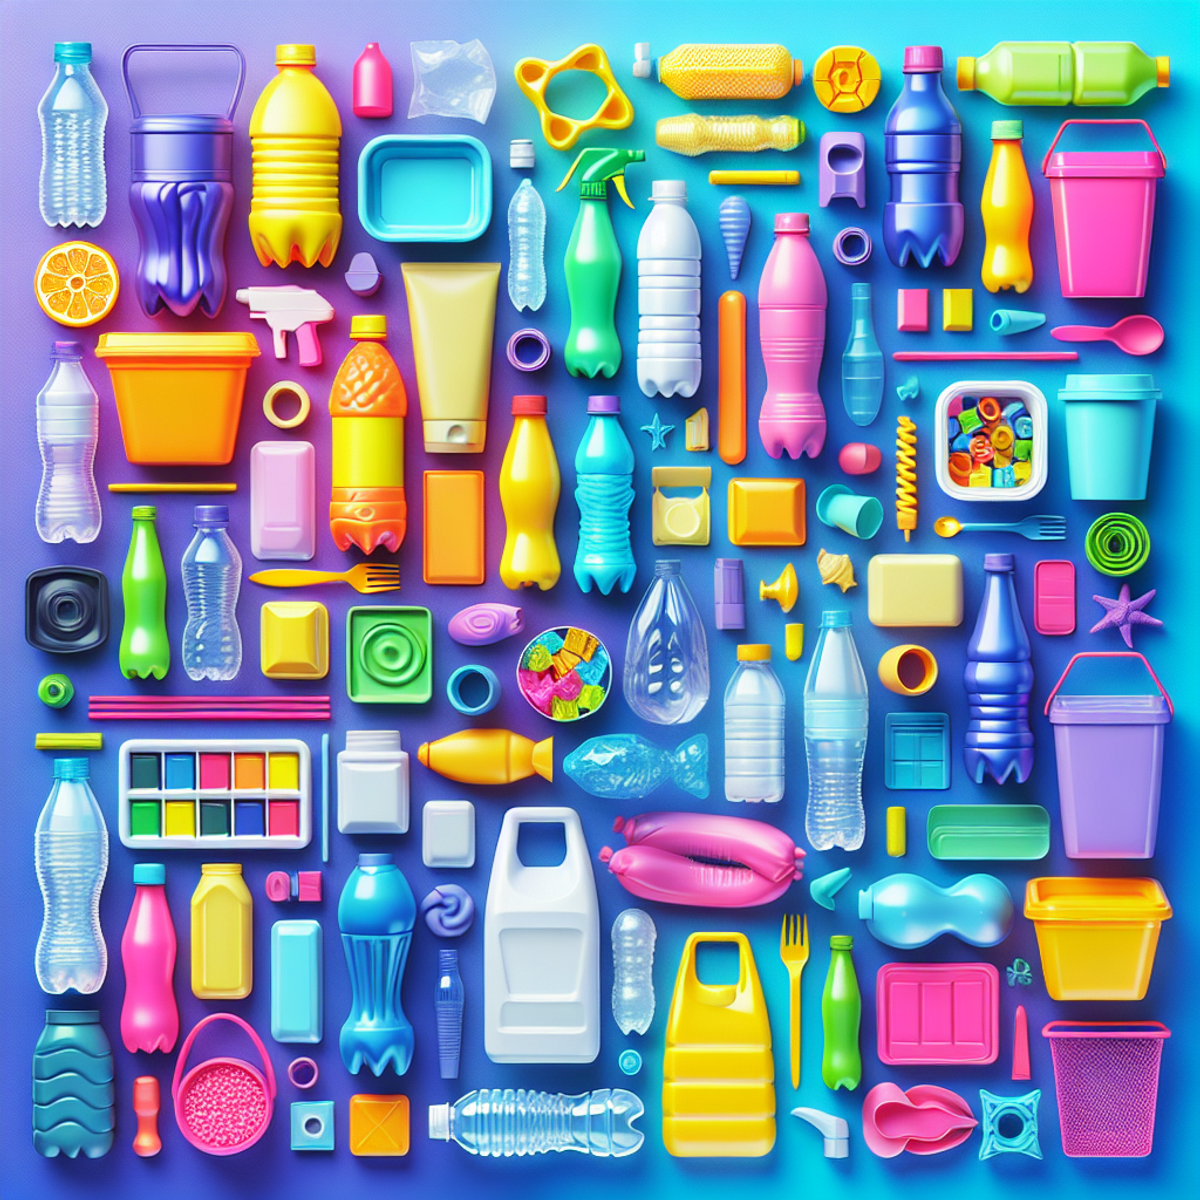 A colorful assortment of plastic bottles, containers, and packaging arranged in an artful display.